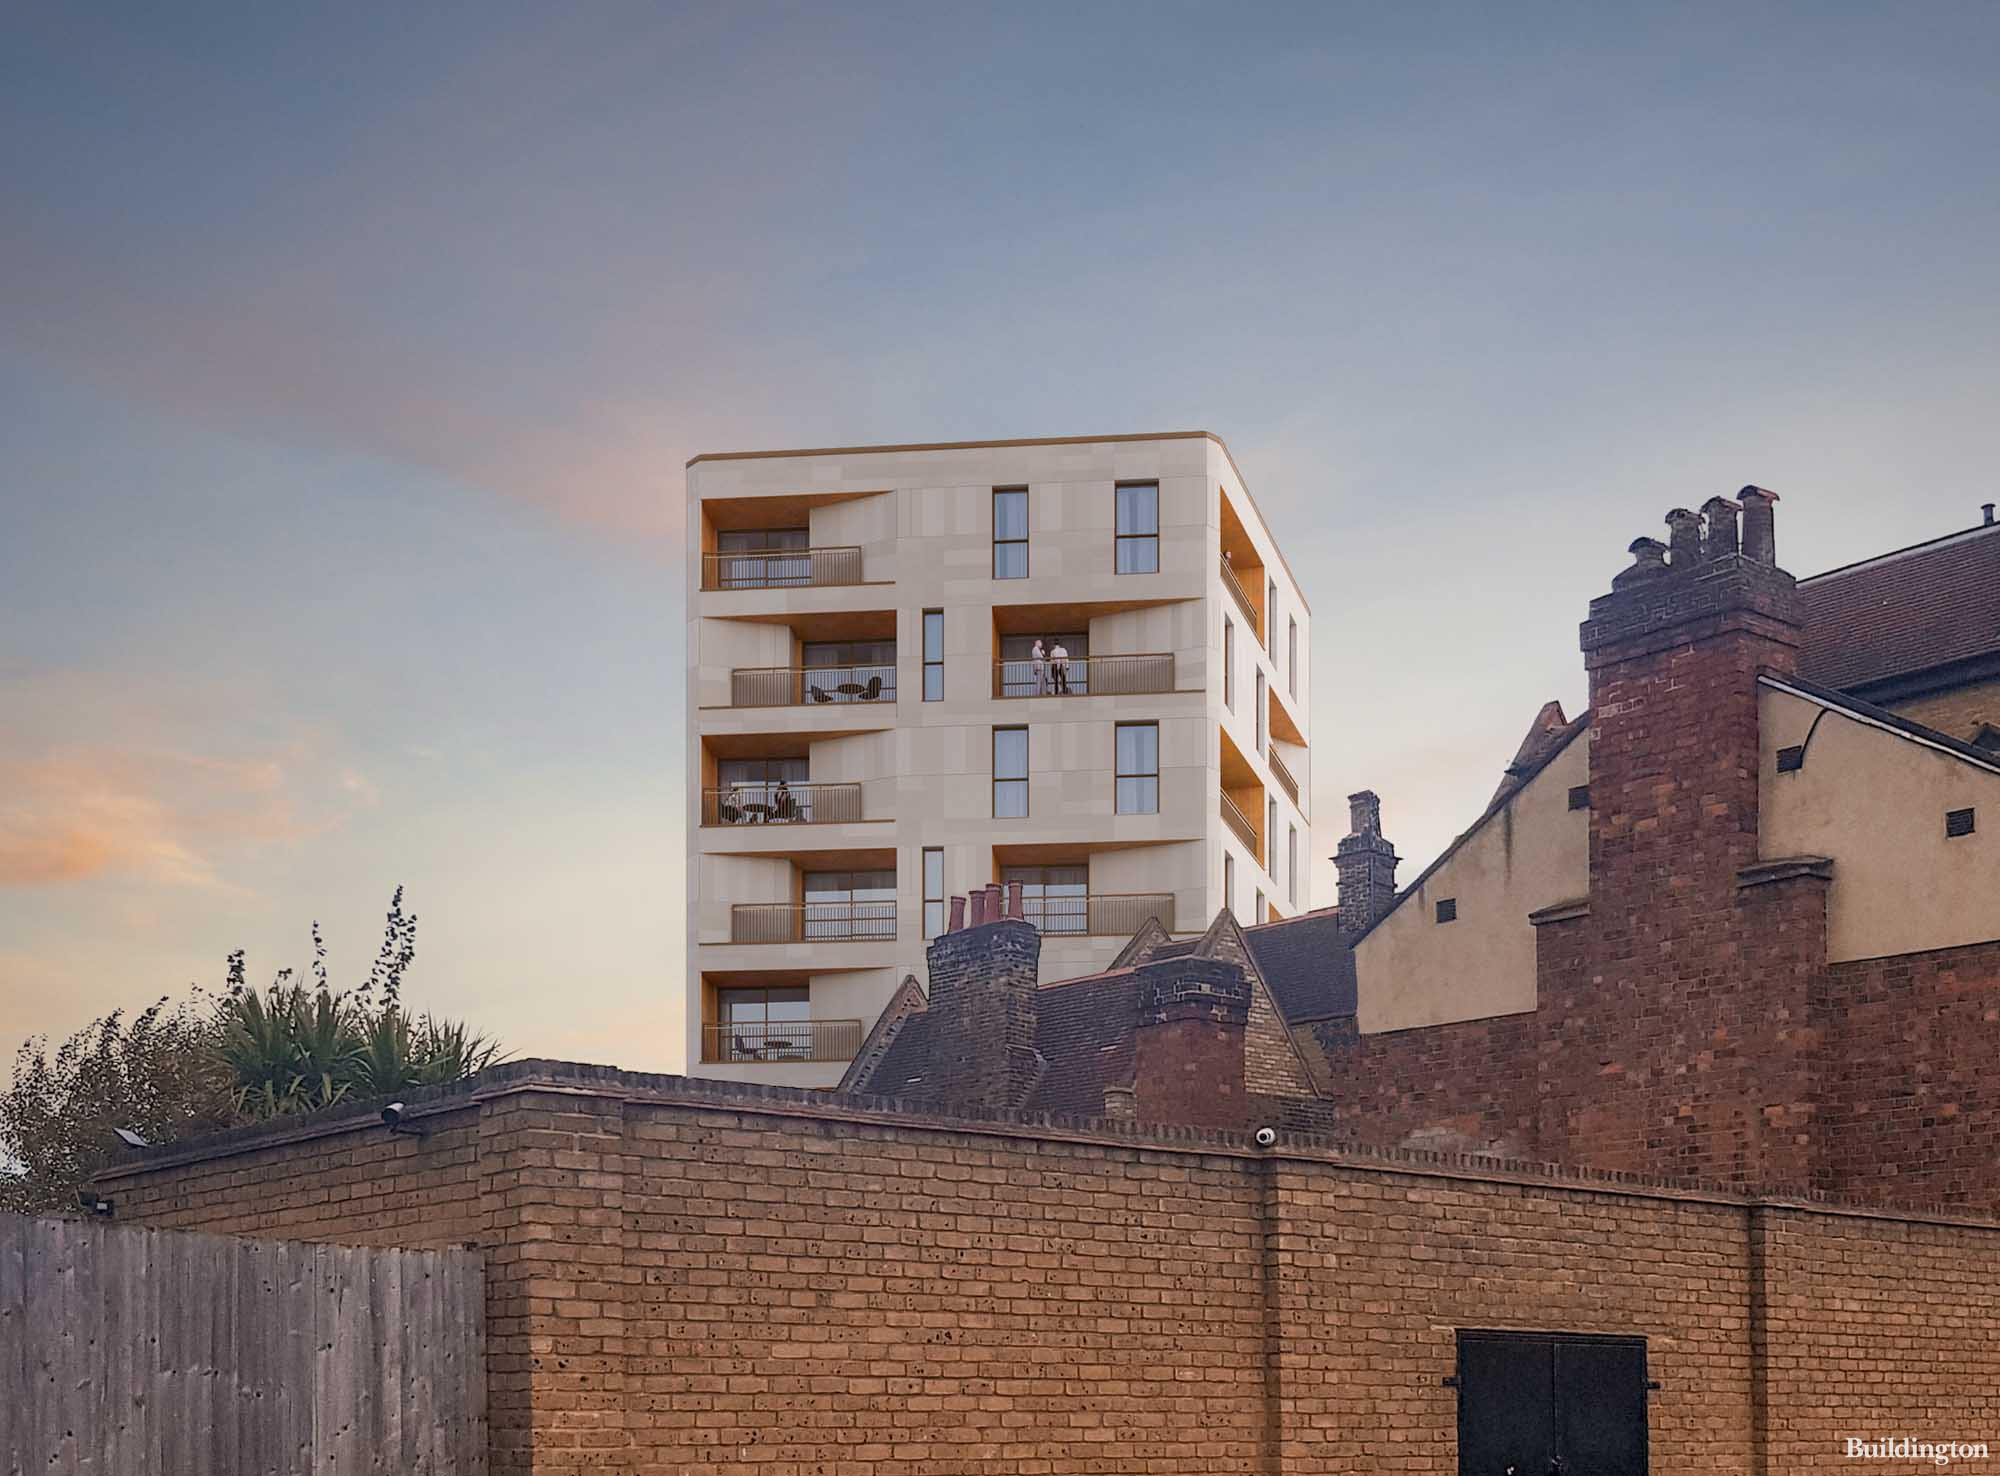 Kensal View apartment building designed by airc in London NW10.